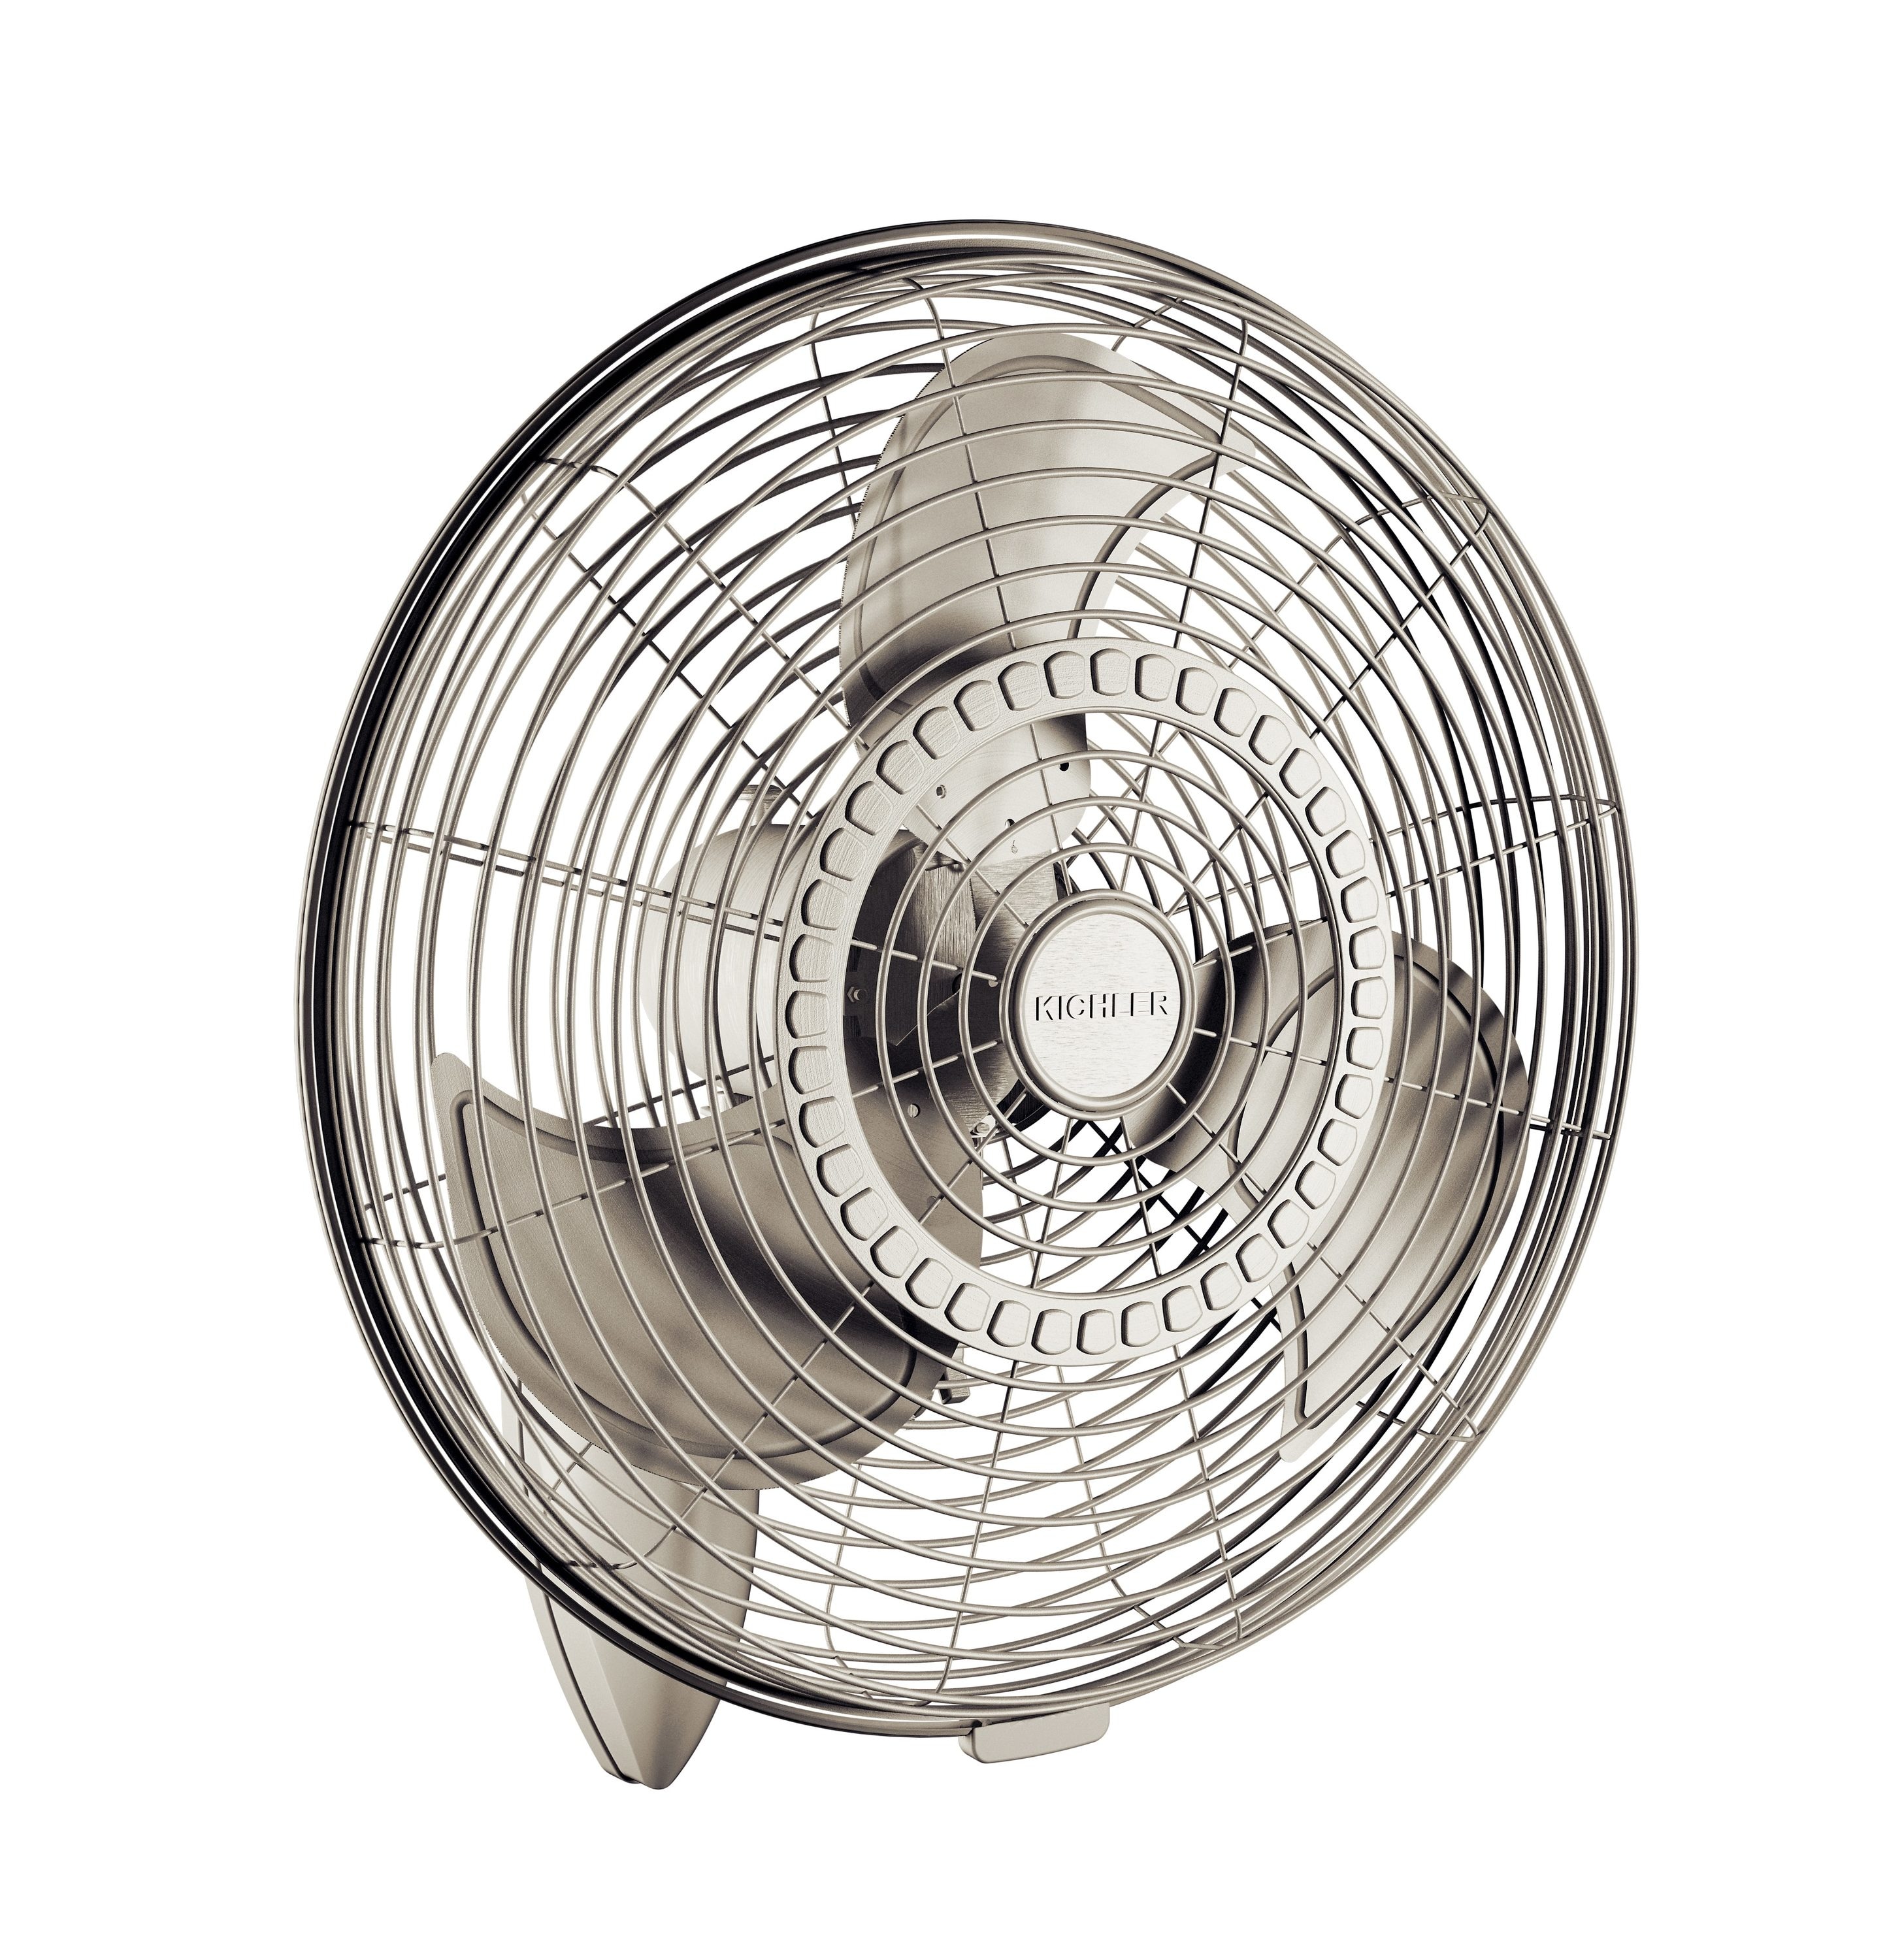 Kichler Pola 24-in Indoor or Outdoor Silver Wall Mounted Fan in the ...